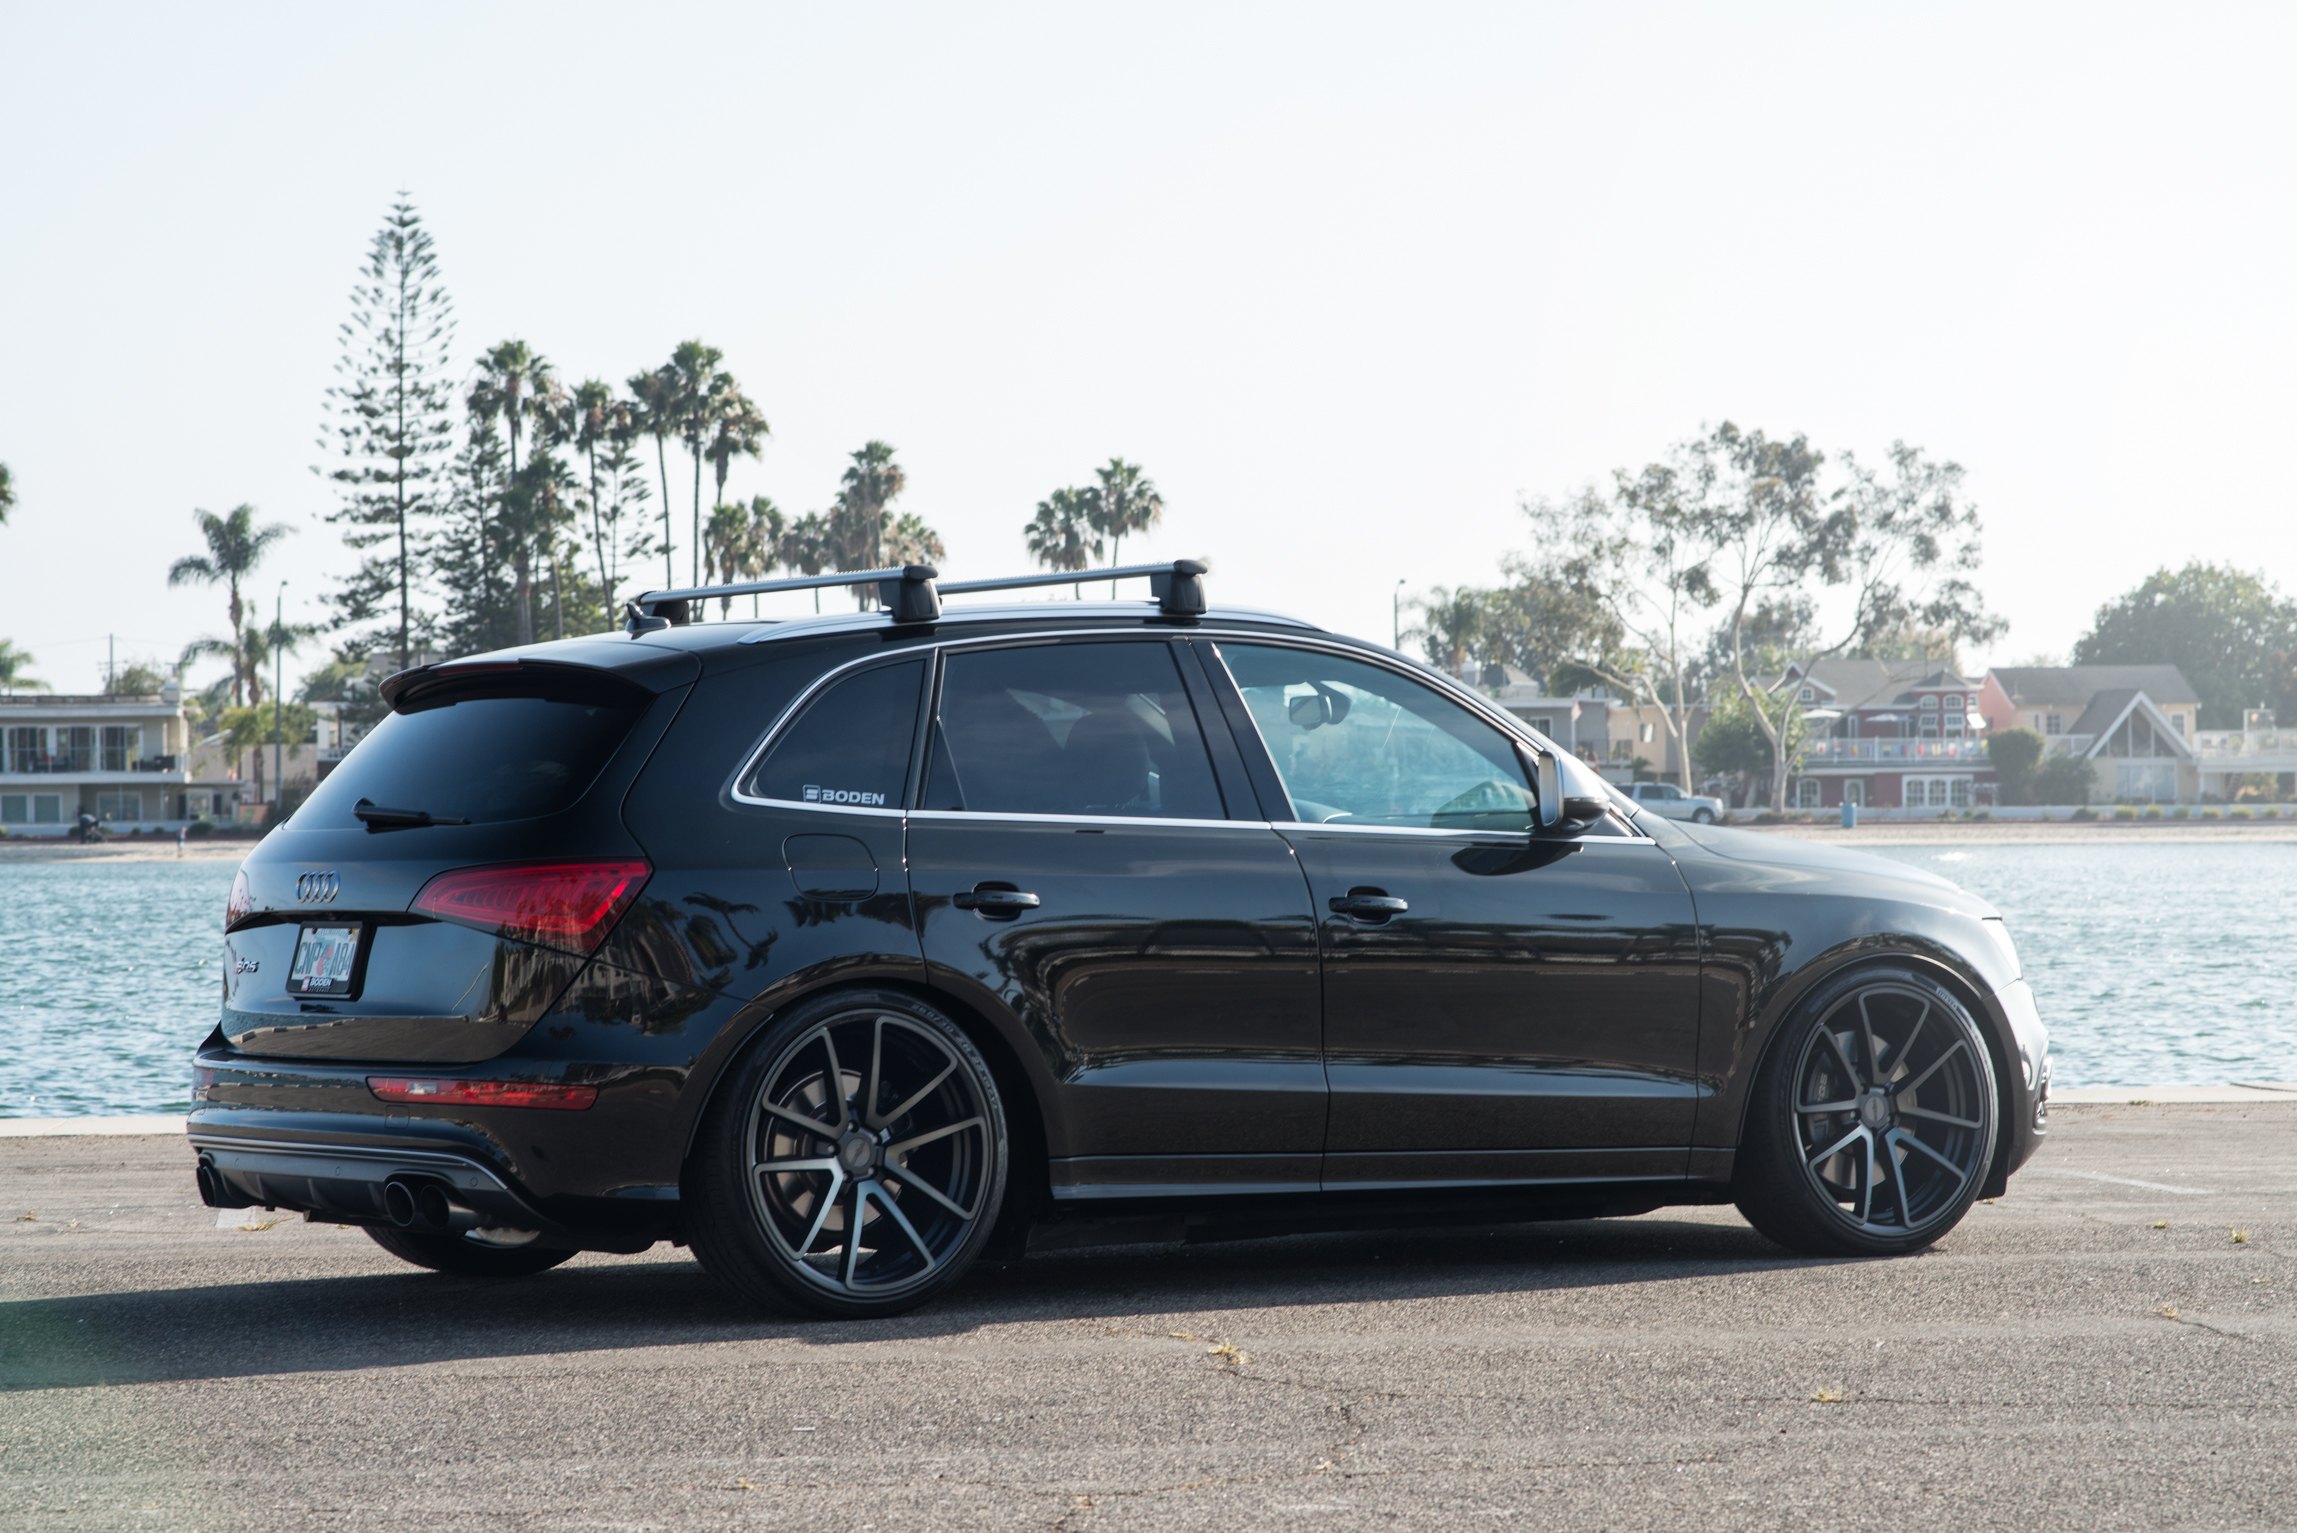 Aftermarket Rear Diffuser on Black Audi Q5 - Photo by Rotiform